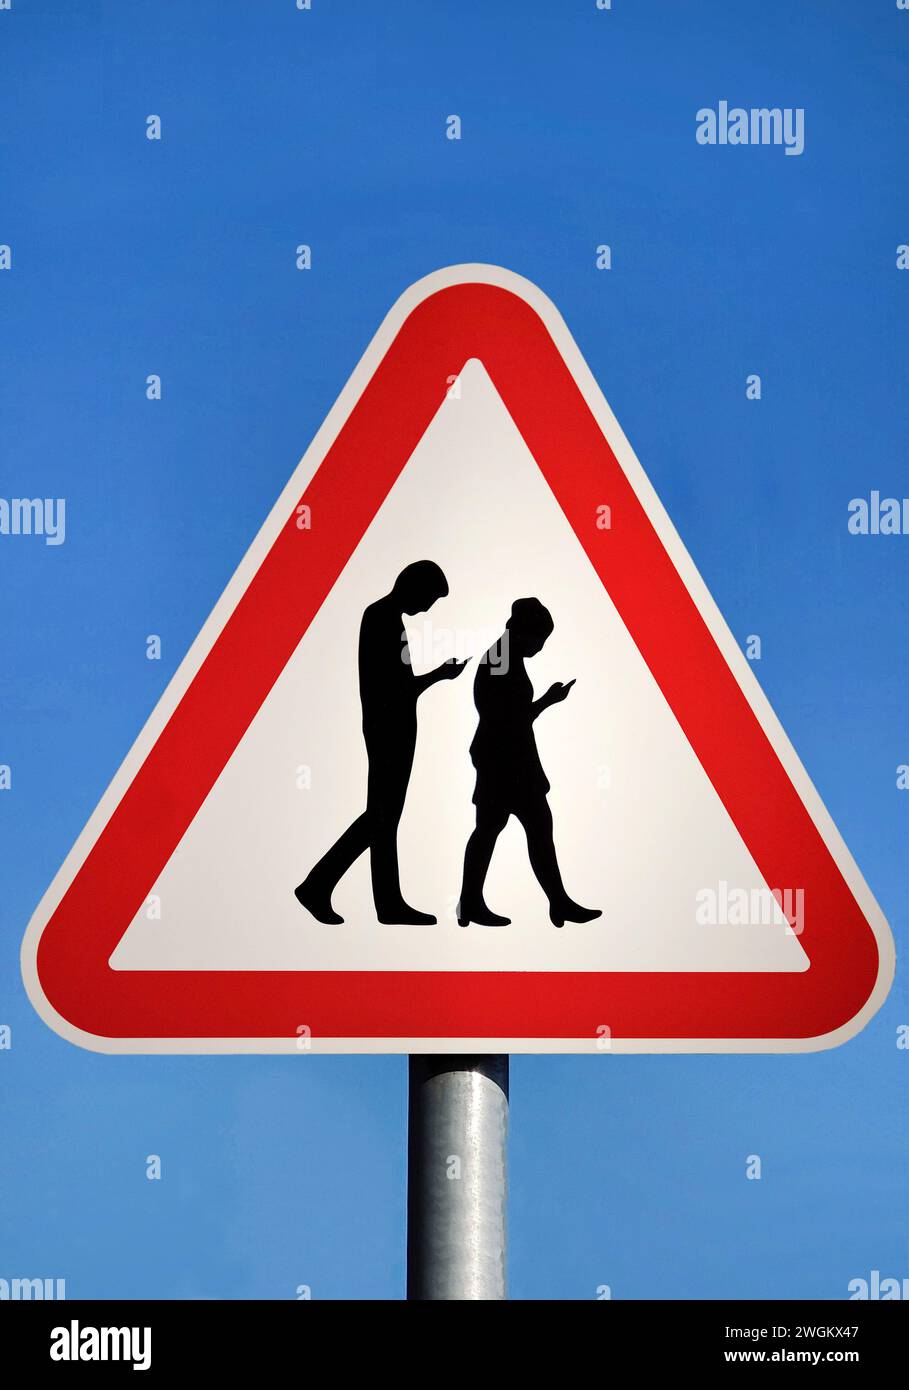 Fictitious traffic sign Danger from cell phone users, photomontage Stock Photo